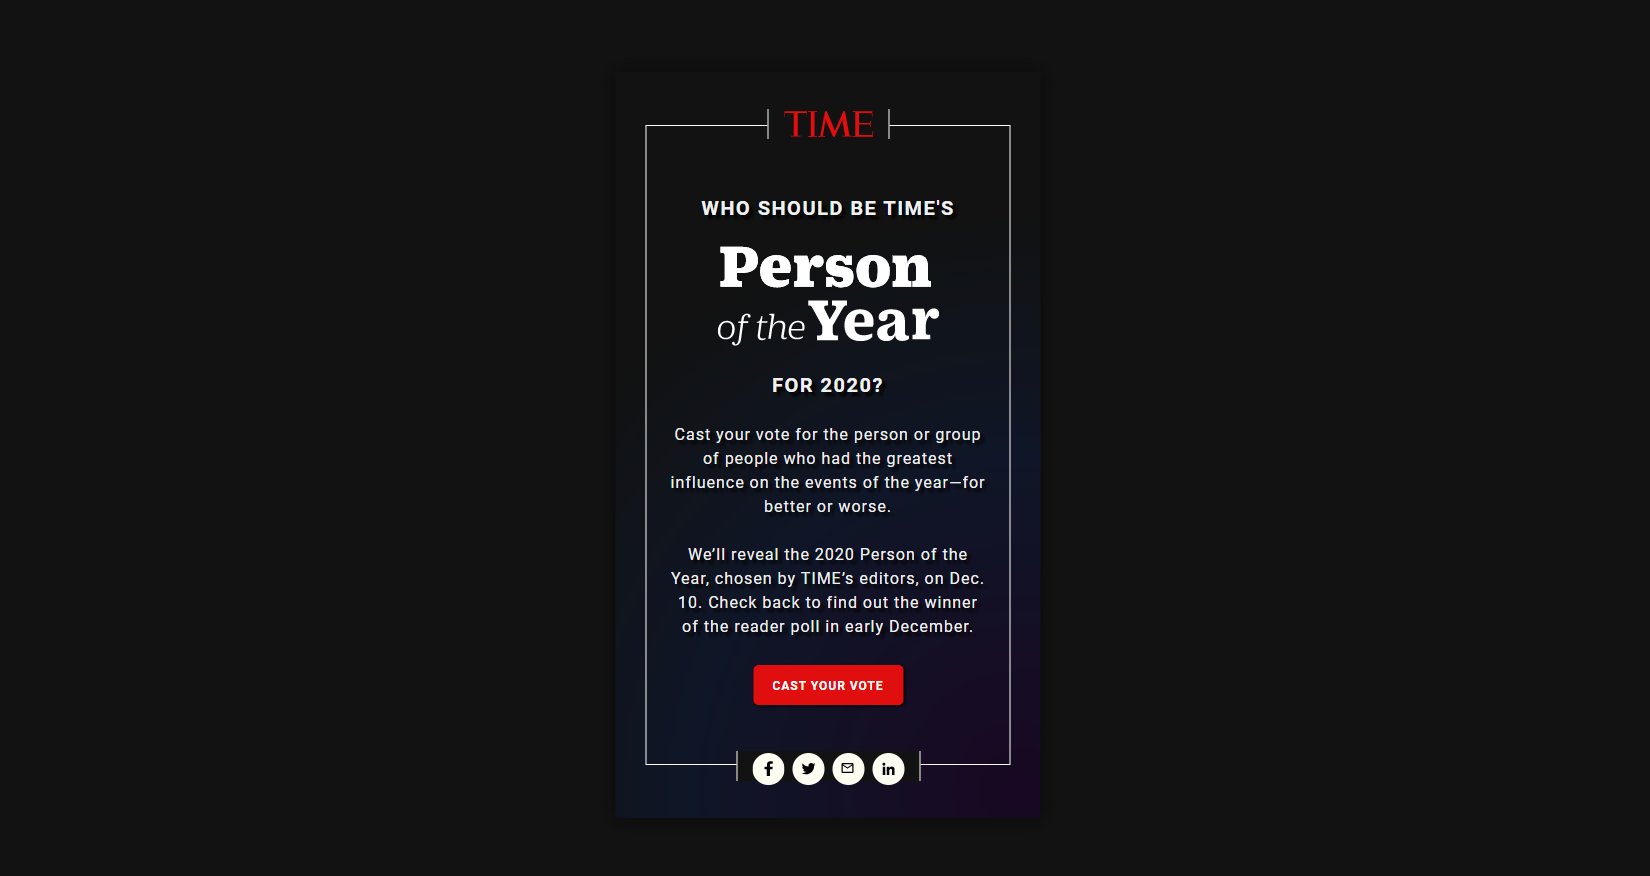 Dr. Anthony Fauci, essential workers among list of Time Person of the Year reader poll nominees | WGN-TV